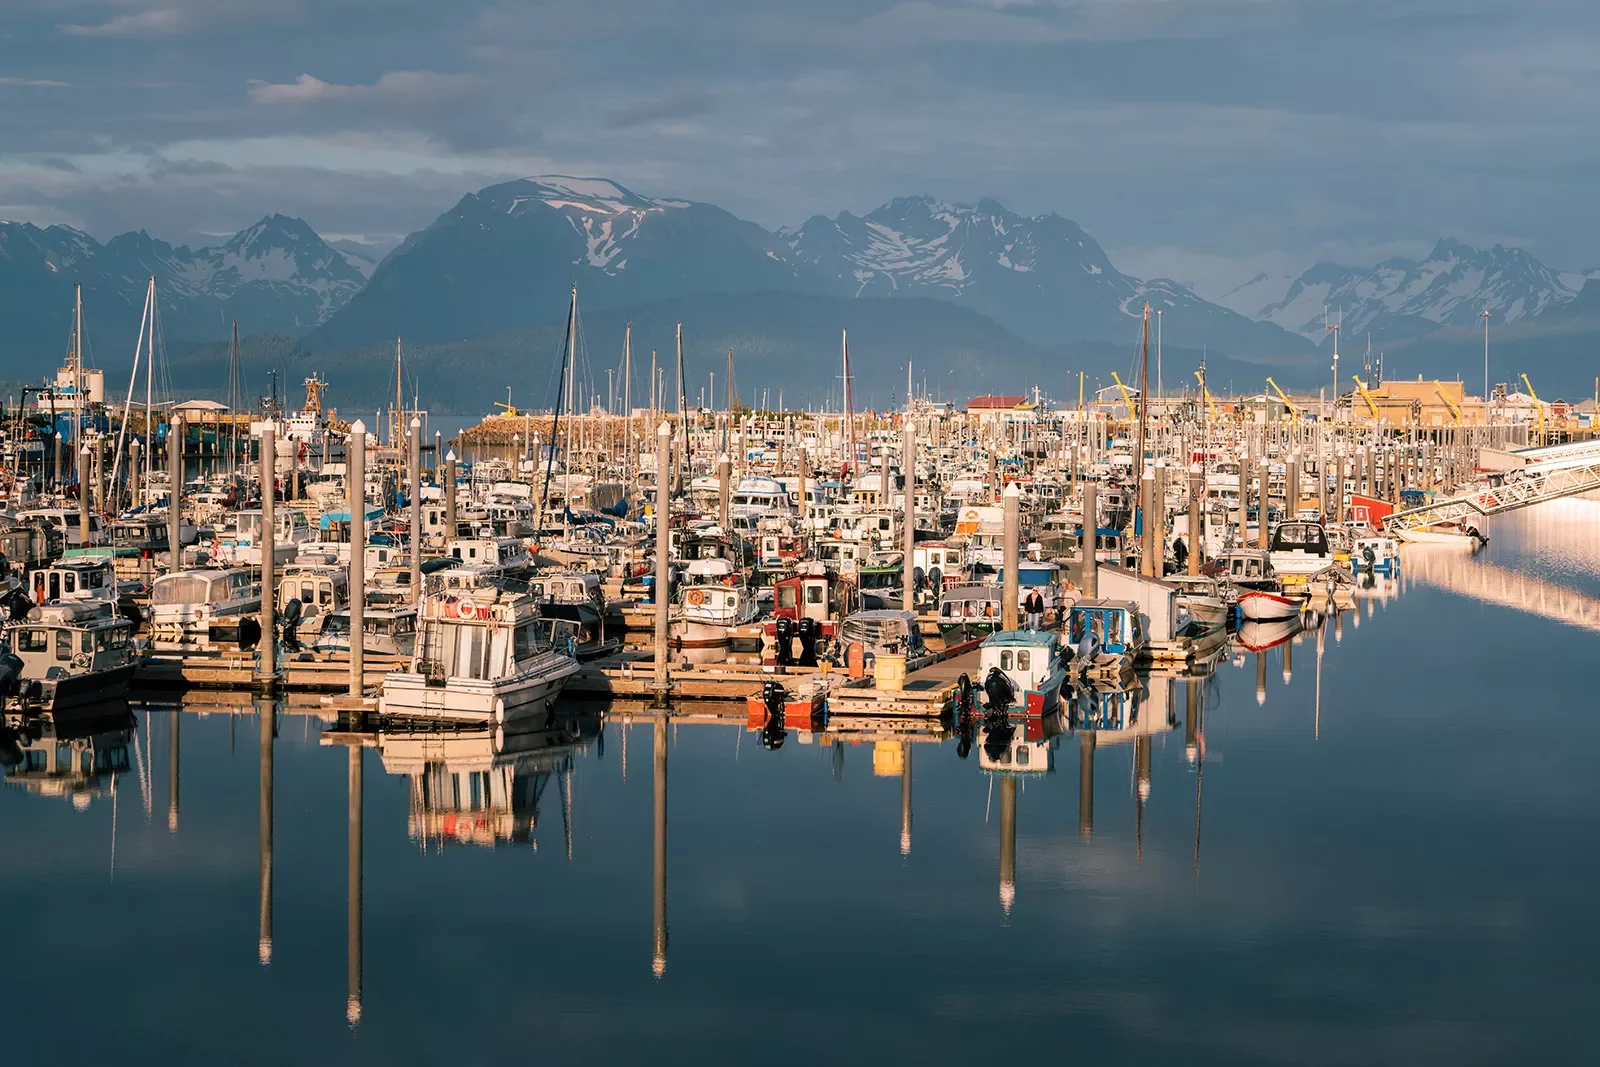 Many small boats parked in a harbor in Alaska.